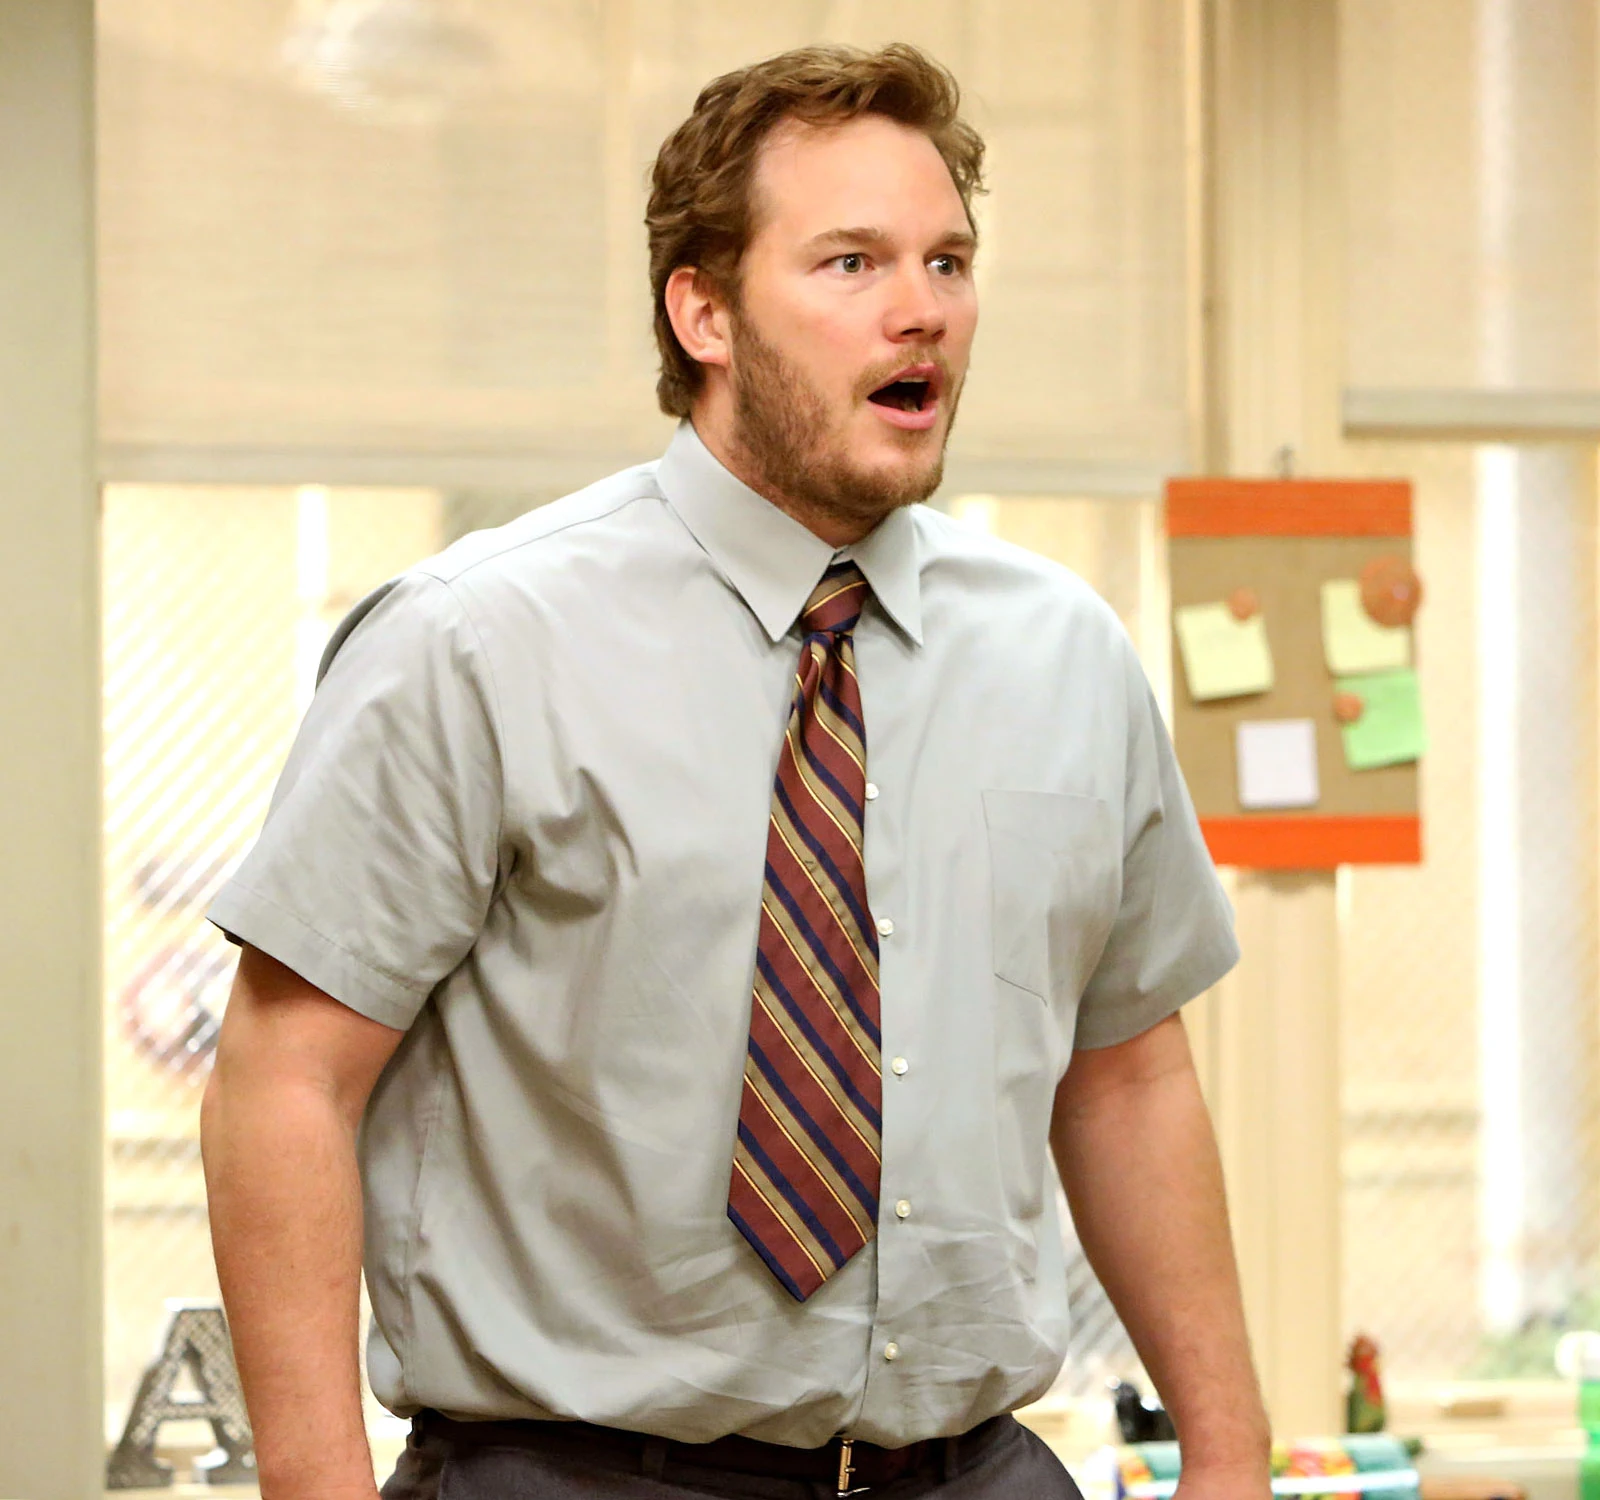 What is the name of the character Chris Pratt played in the 'Guardians of the Galaxy' films?